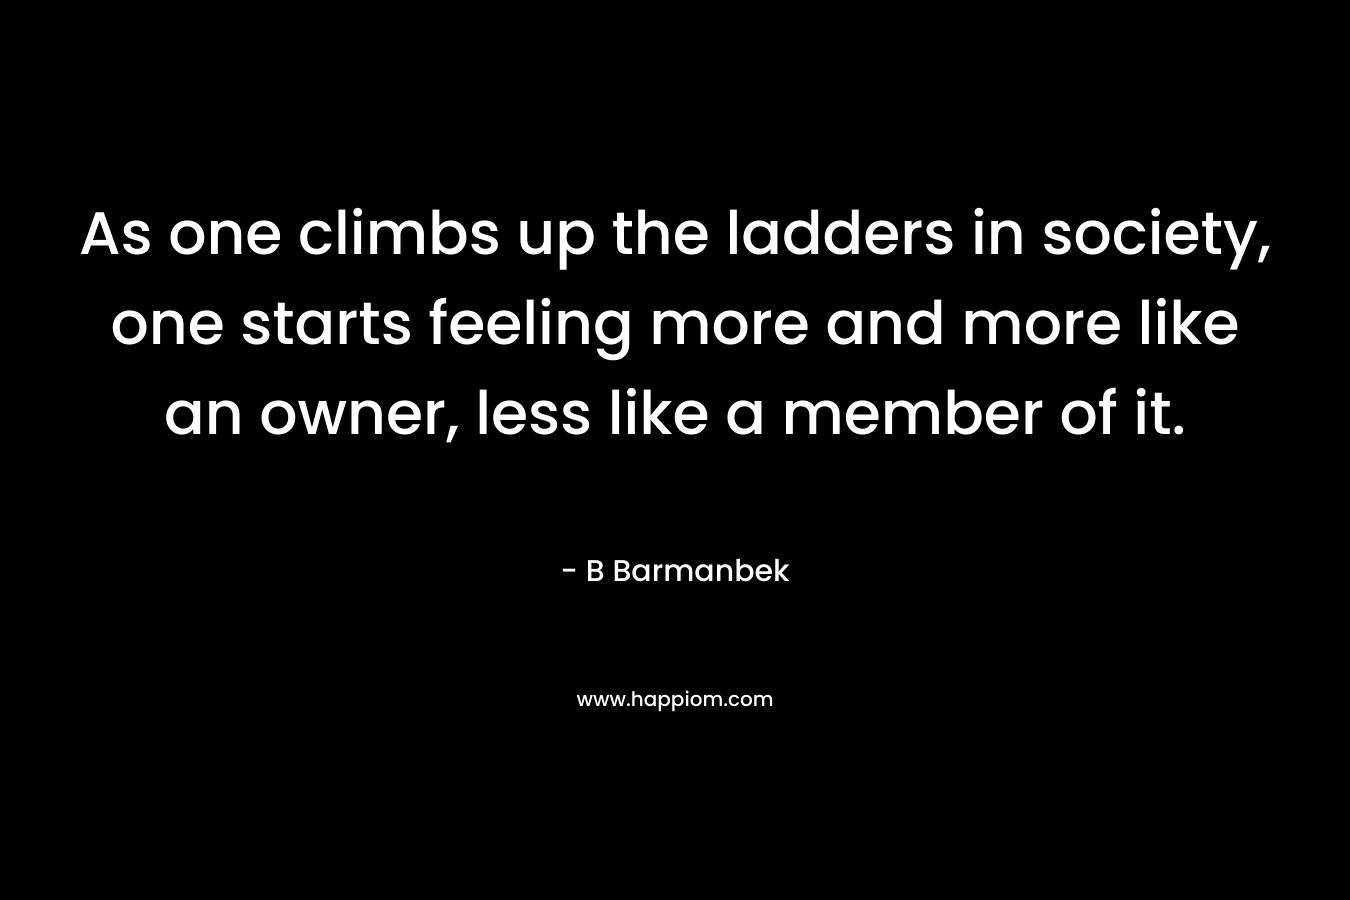 As one climbs up the ladders in society, one starts feeling more and more like an owner, less like a member of it.